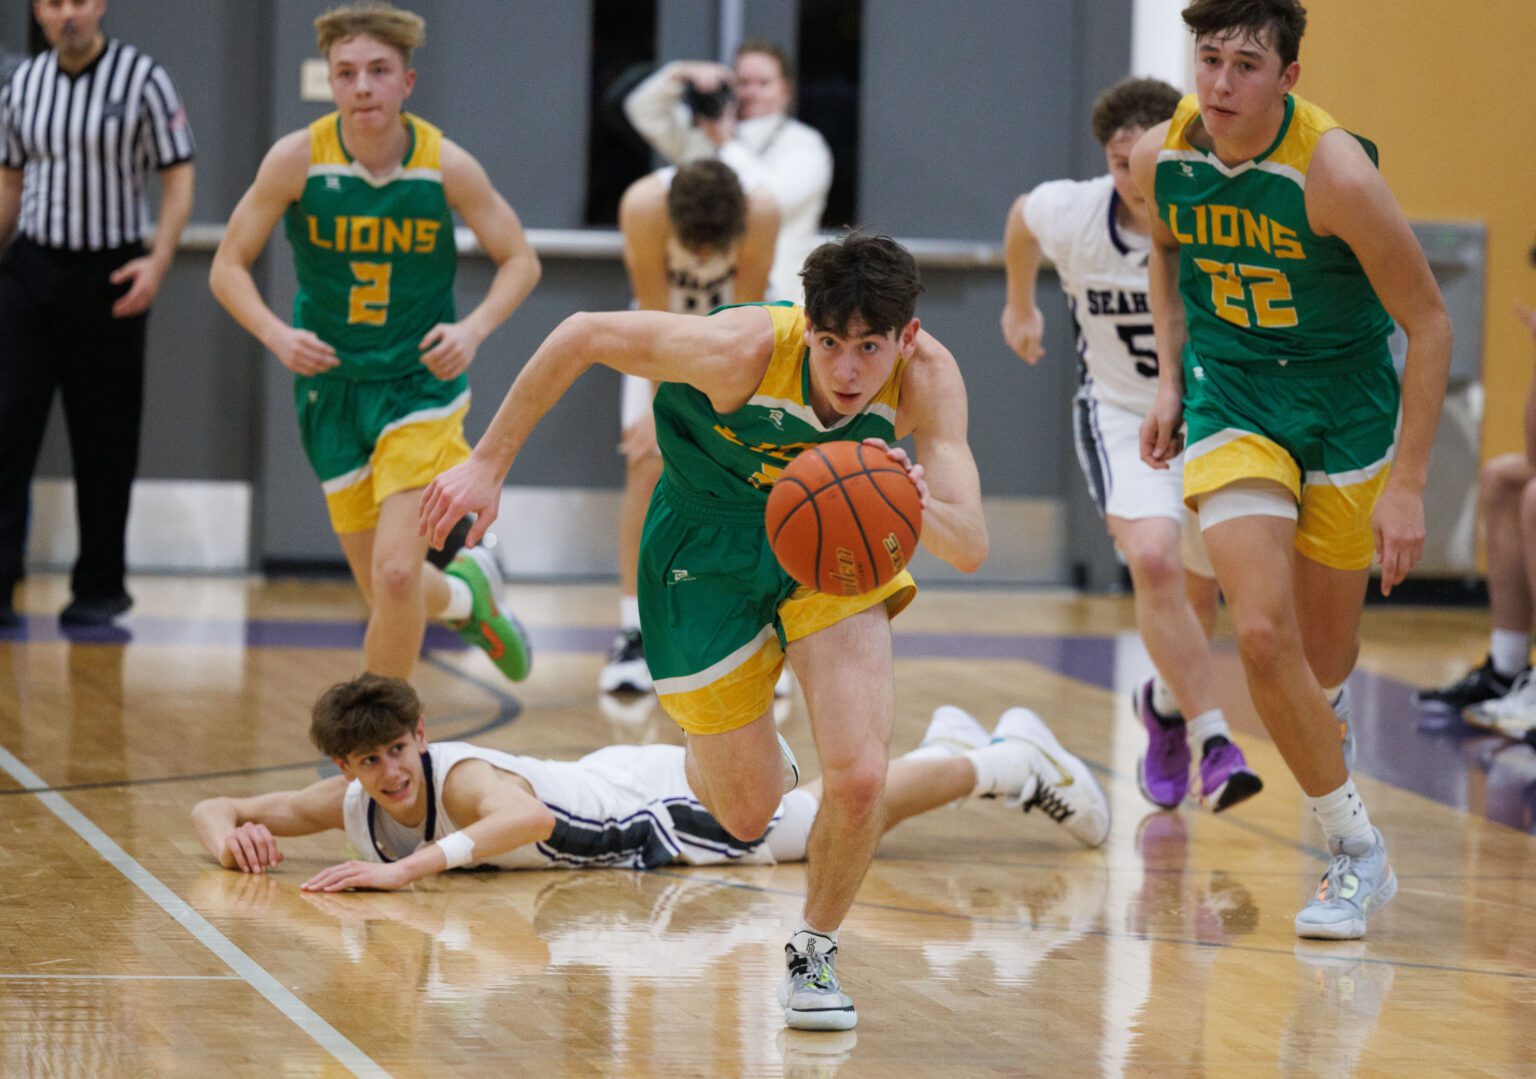 Lynden's Coston "Bubba" Parcher grabs the turnover by Anacortes' Davis Fogle in the final seconds of their game on Jan. 25 in Anacortes. Lynden beat Anacortes 78-73 via a strong second-half showing.